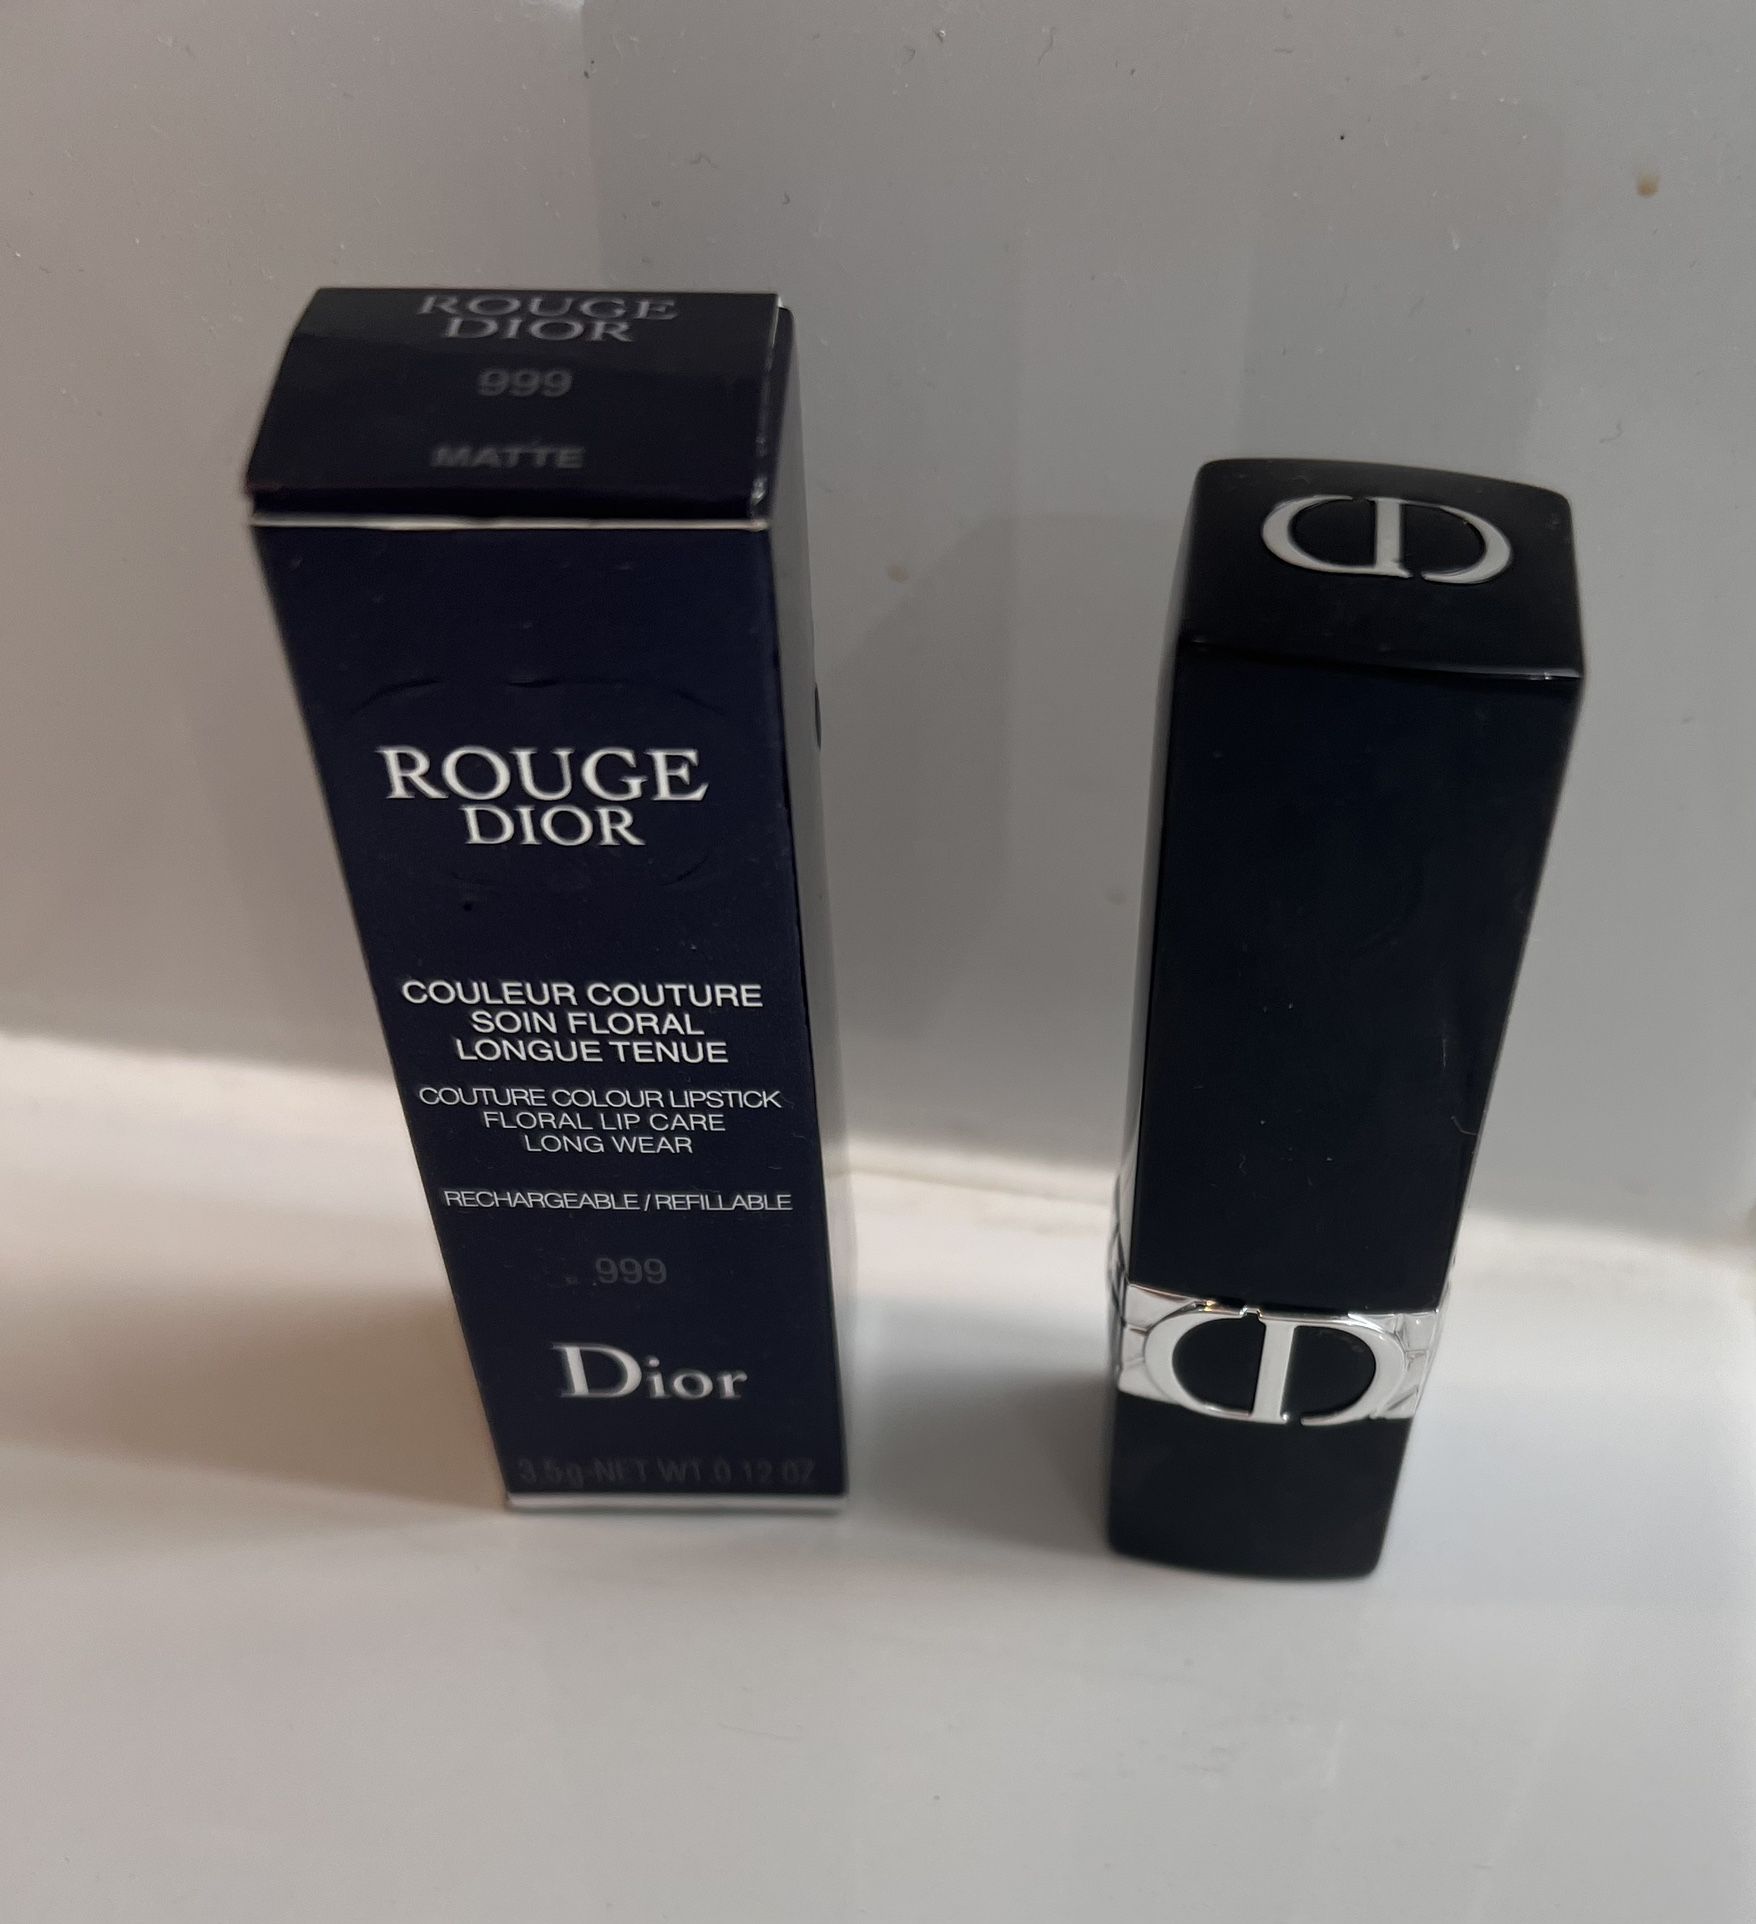 ROUGE DIOR Refillable lipstick with finishes matte,